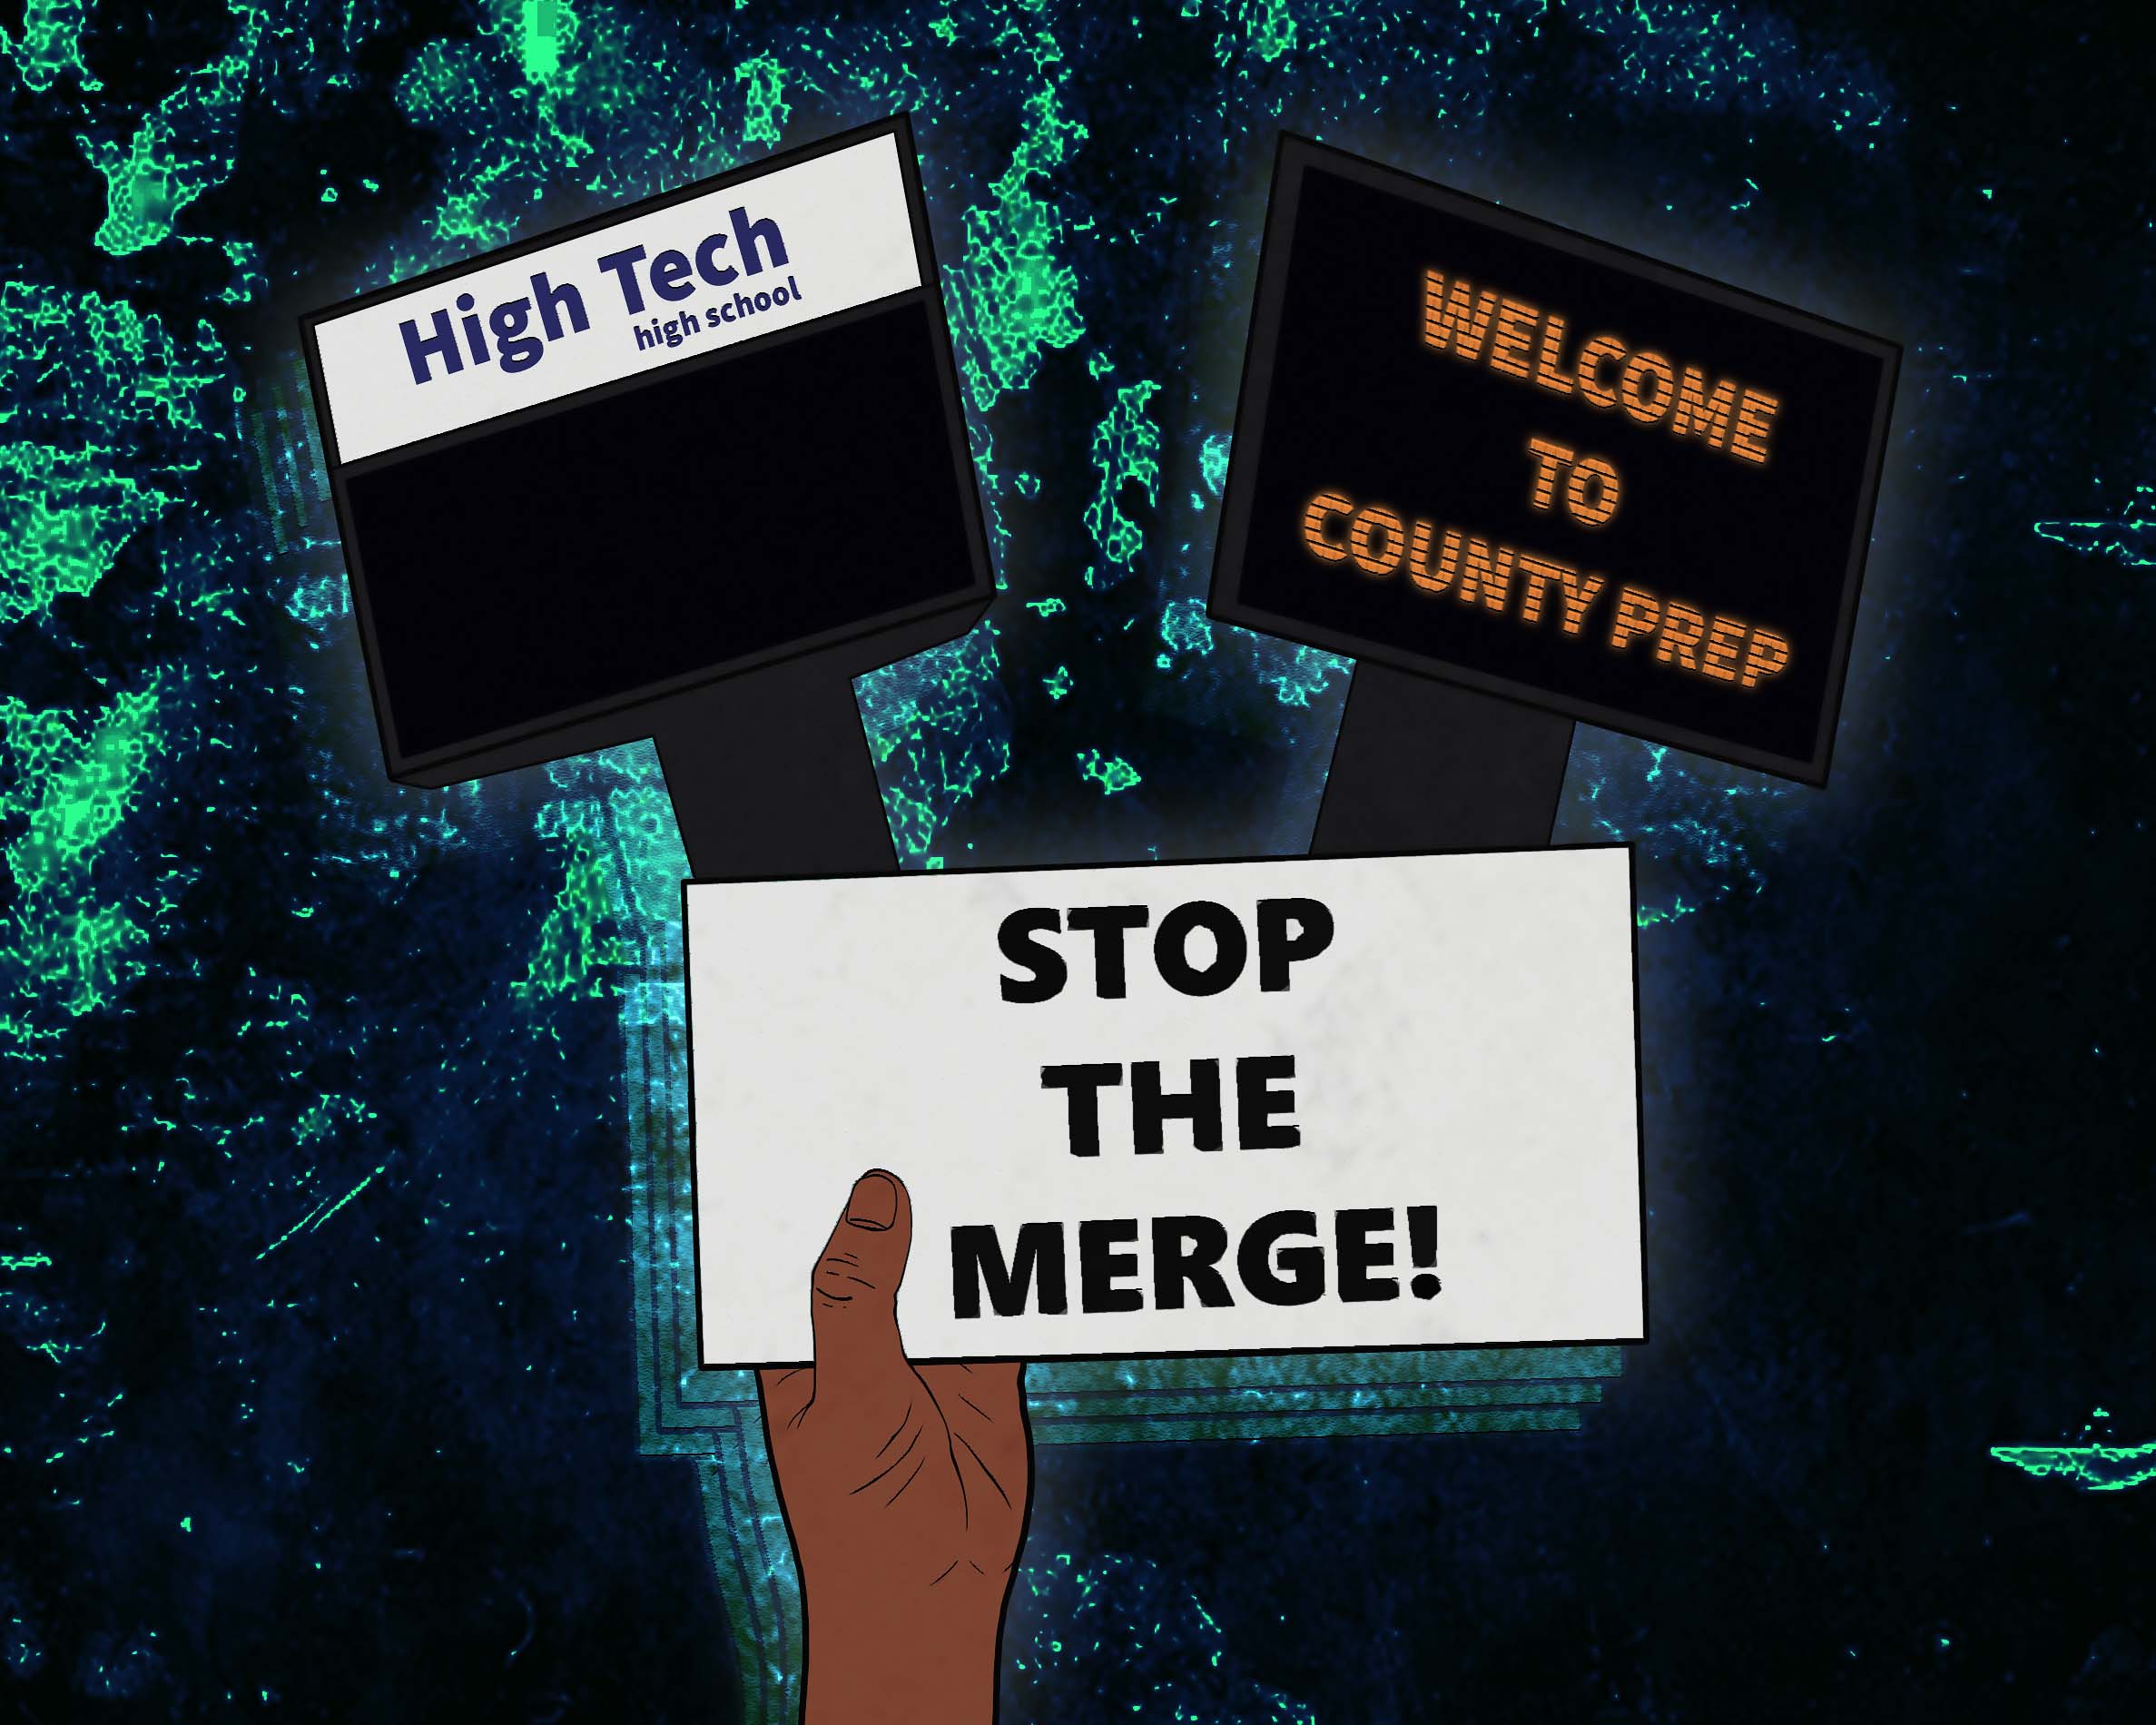 County Prep And High Tech Students, Alumni Beg To Stop The Merge. These Are Their Reasons.